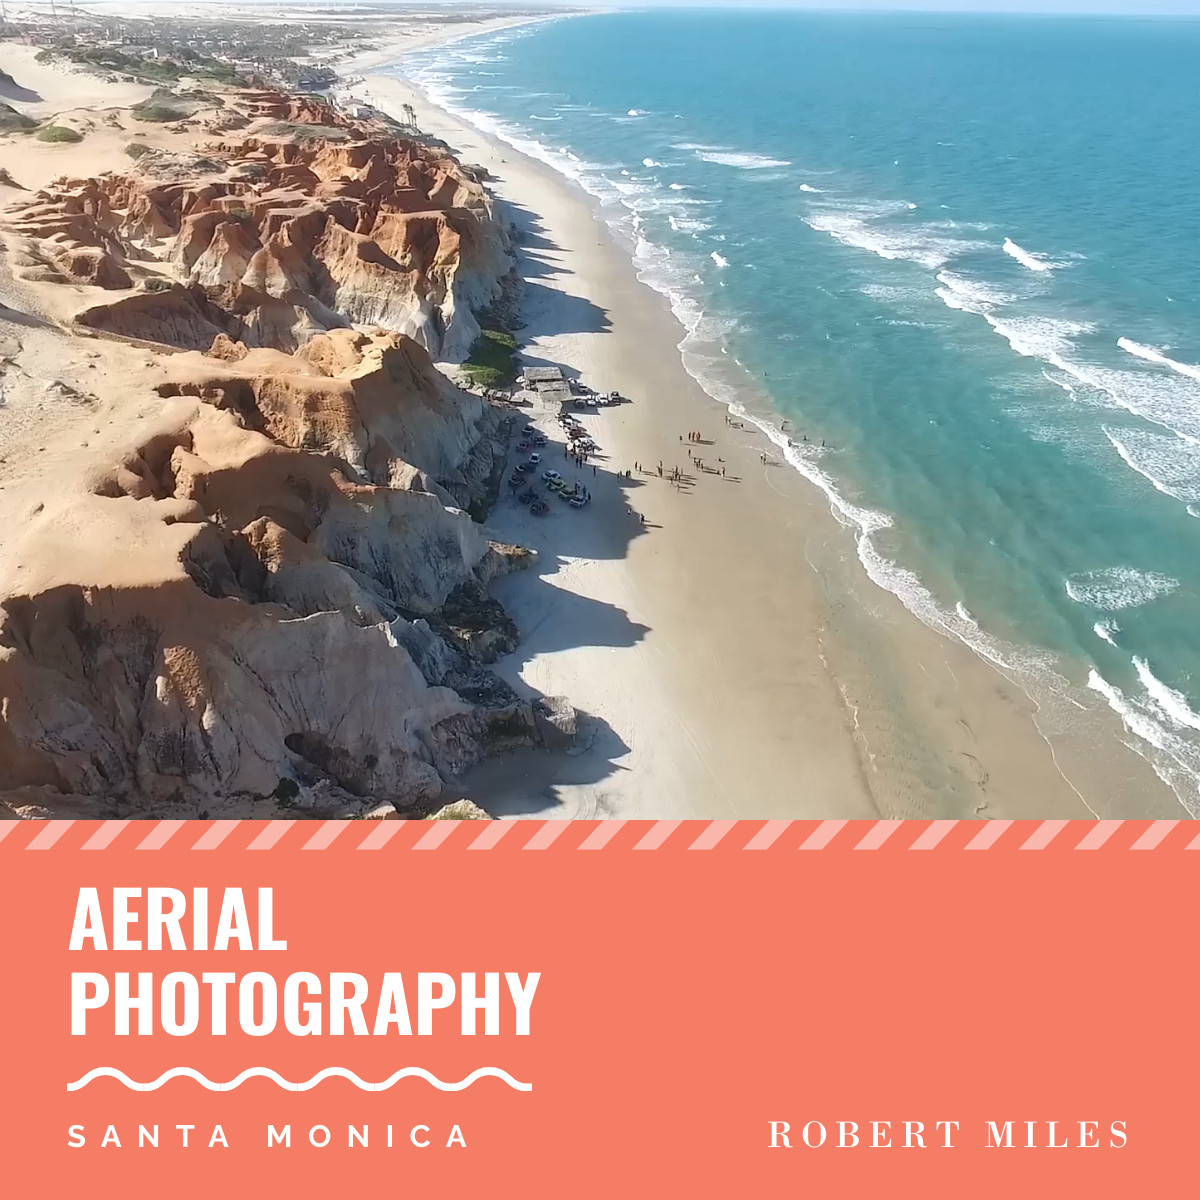 Coral Aerial Drone Photography Video Facebook Video Cover 1250x463